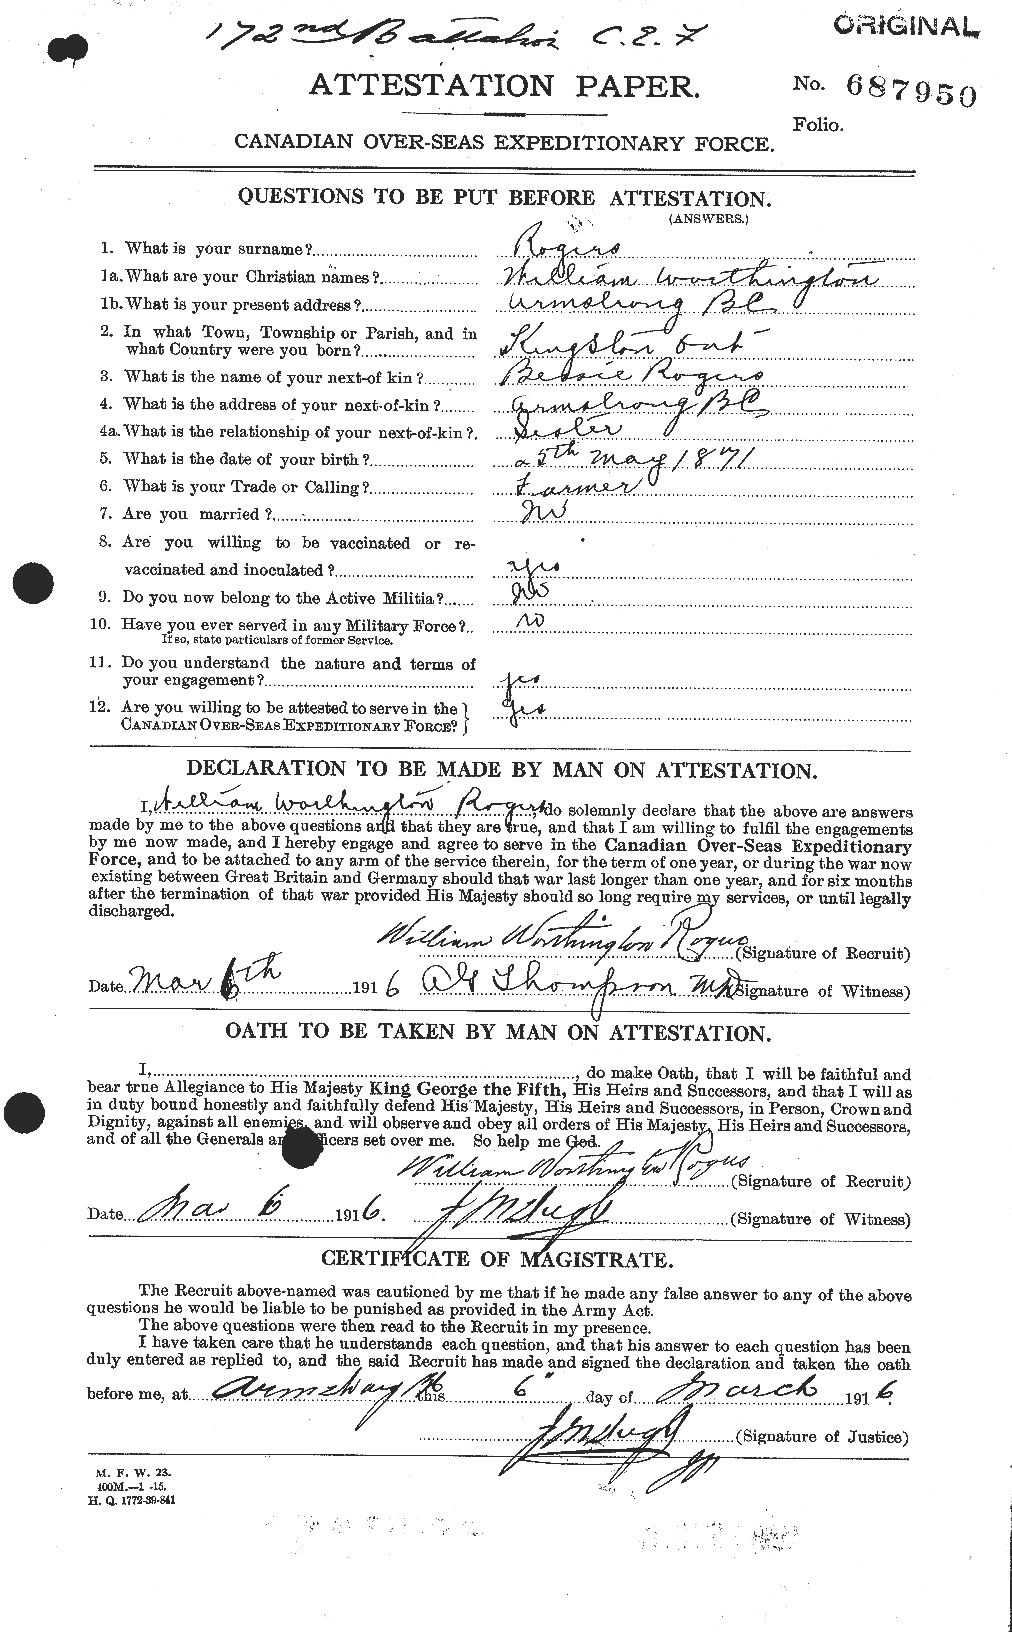 Personnel Records of the First World War - CEF 611945a